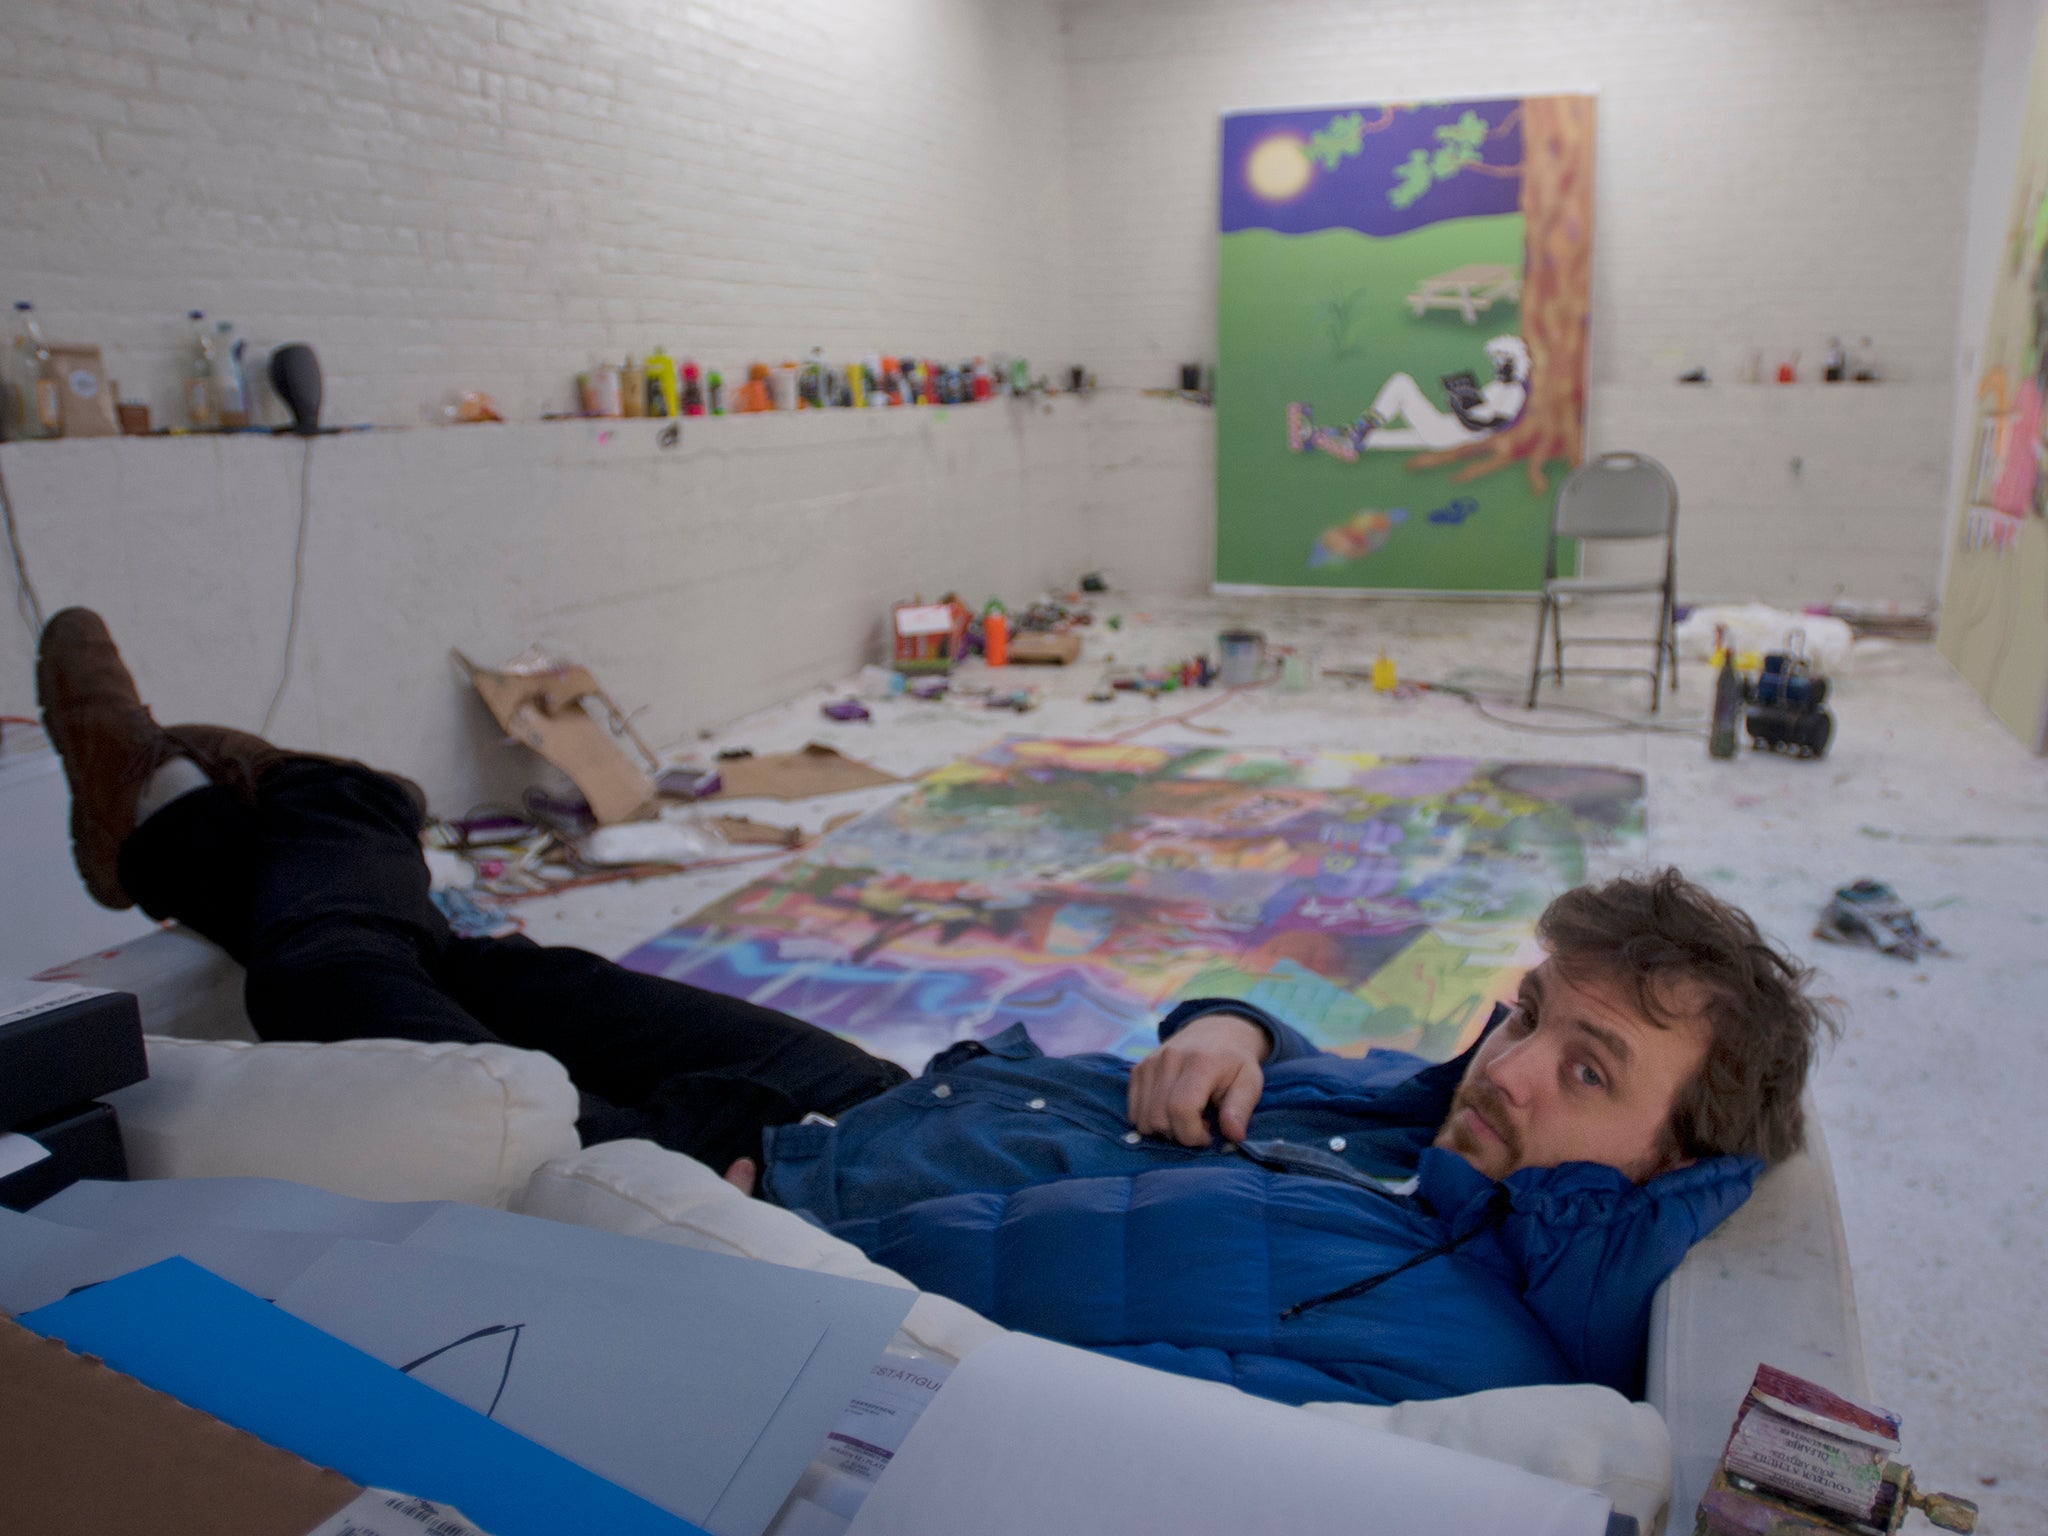 Artist Michael Williams in his studio in Long Island City, Queens, NY.